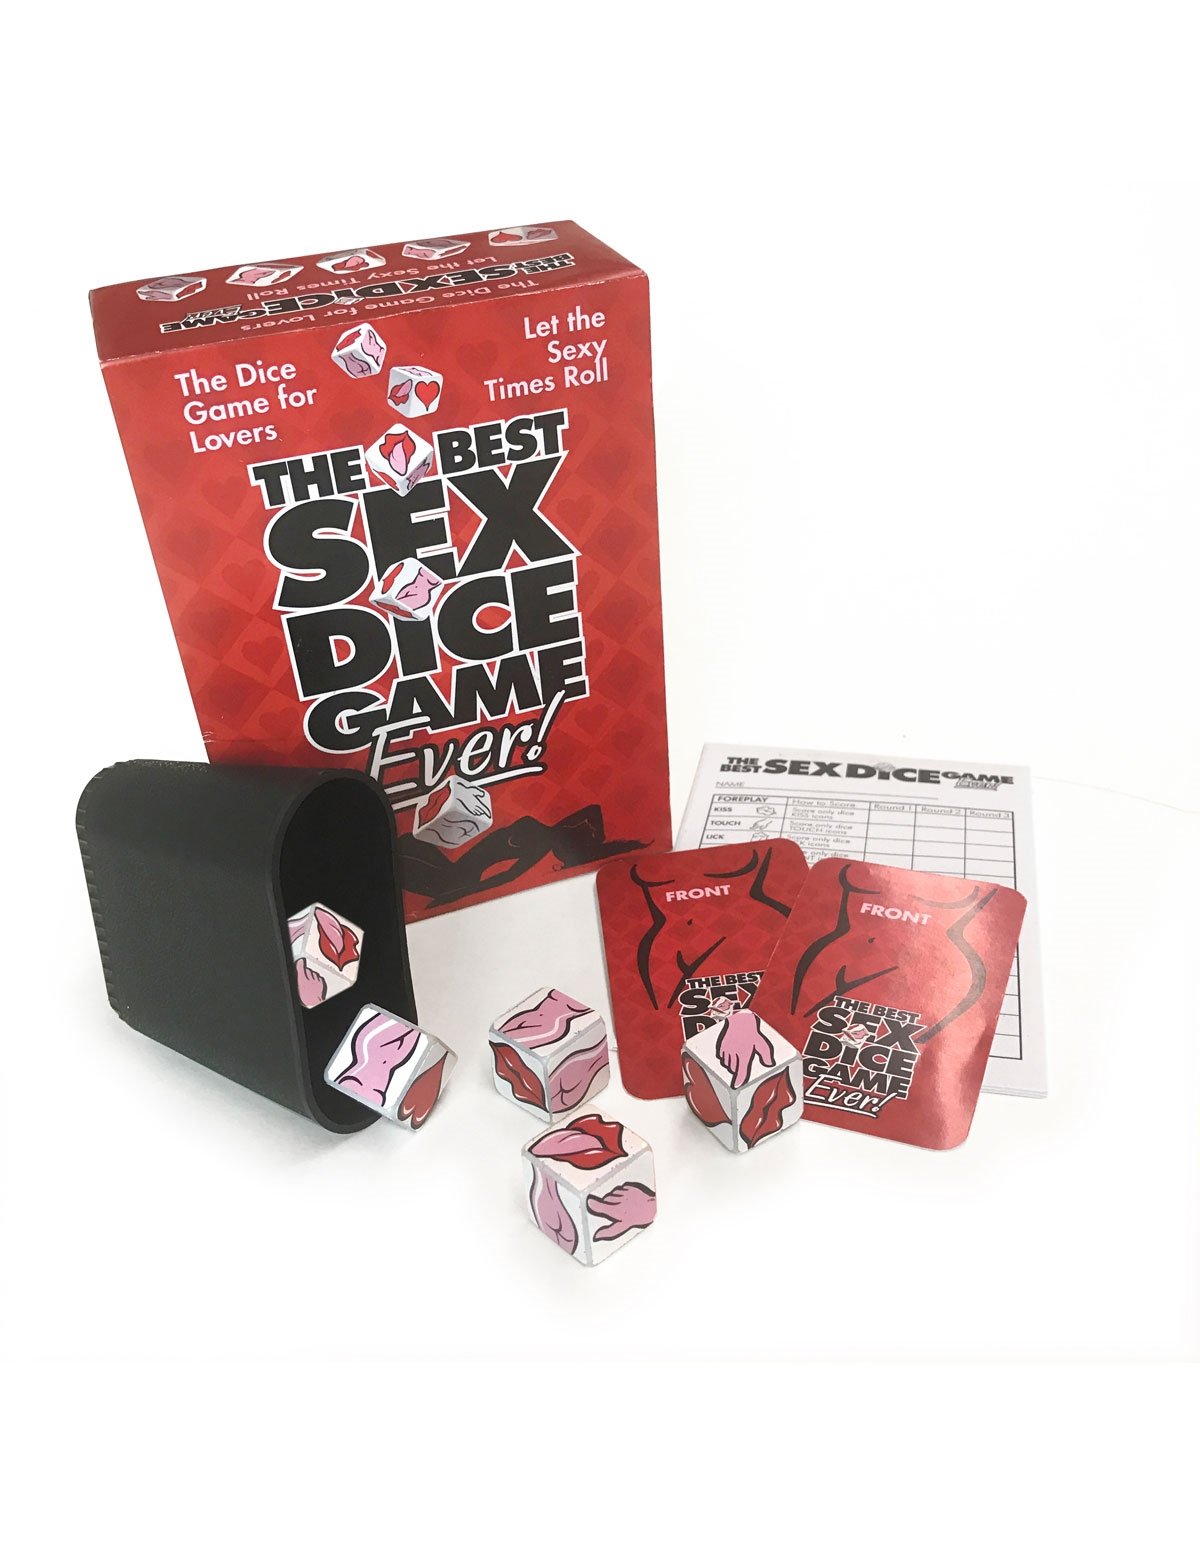 Games that use 5 dice